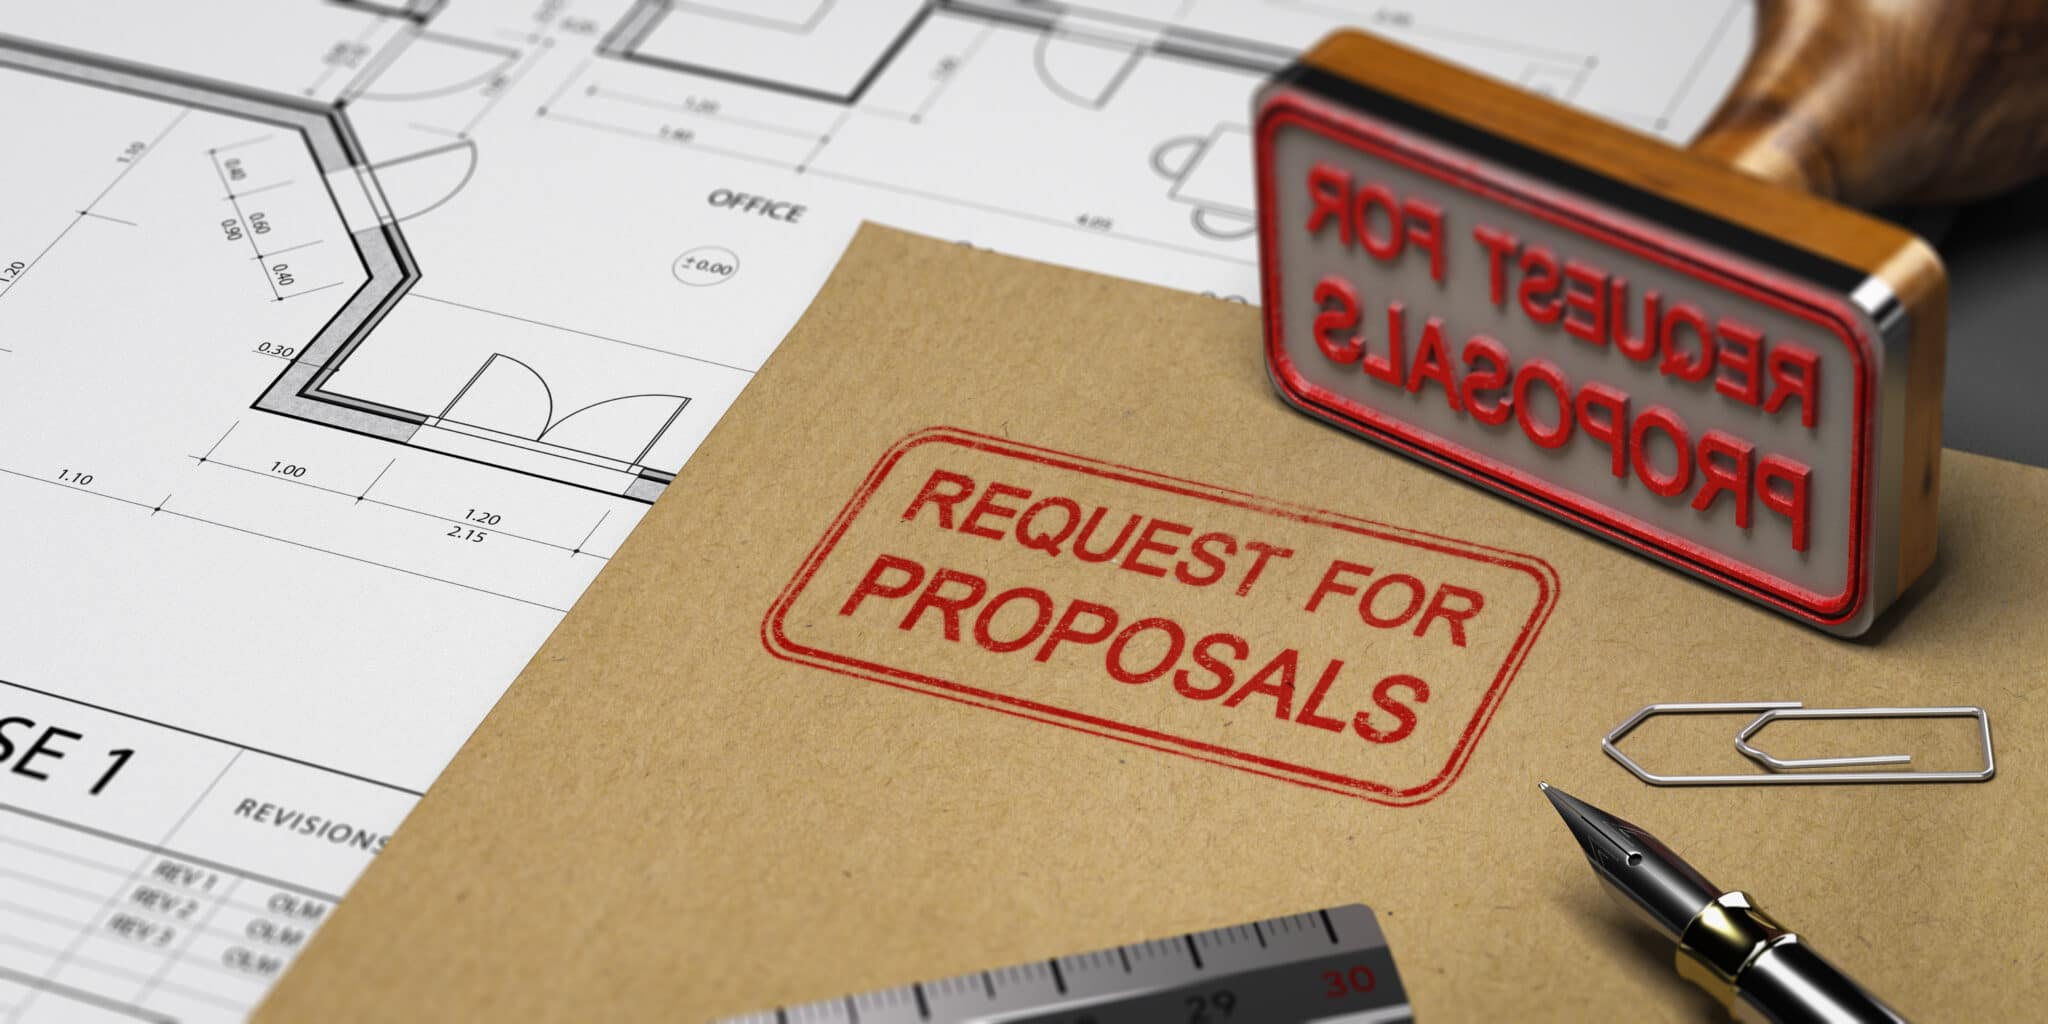 Request for proposals printed on a kraft envelop, with office supplies and rubber stamp, RFP concept. 3D illustration